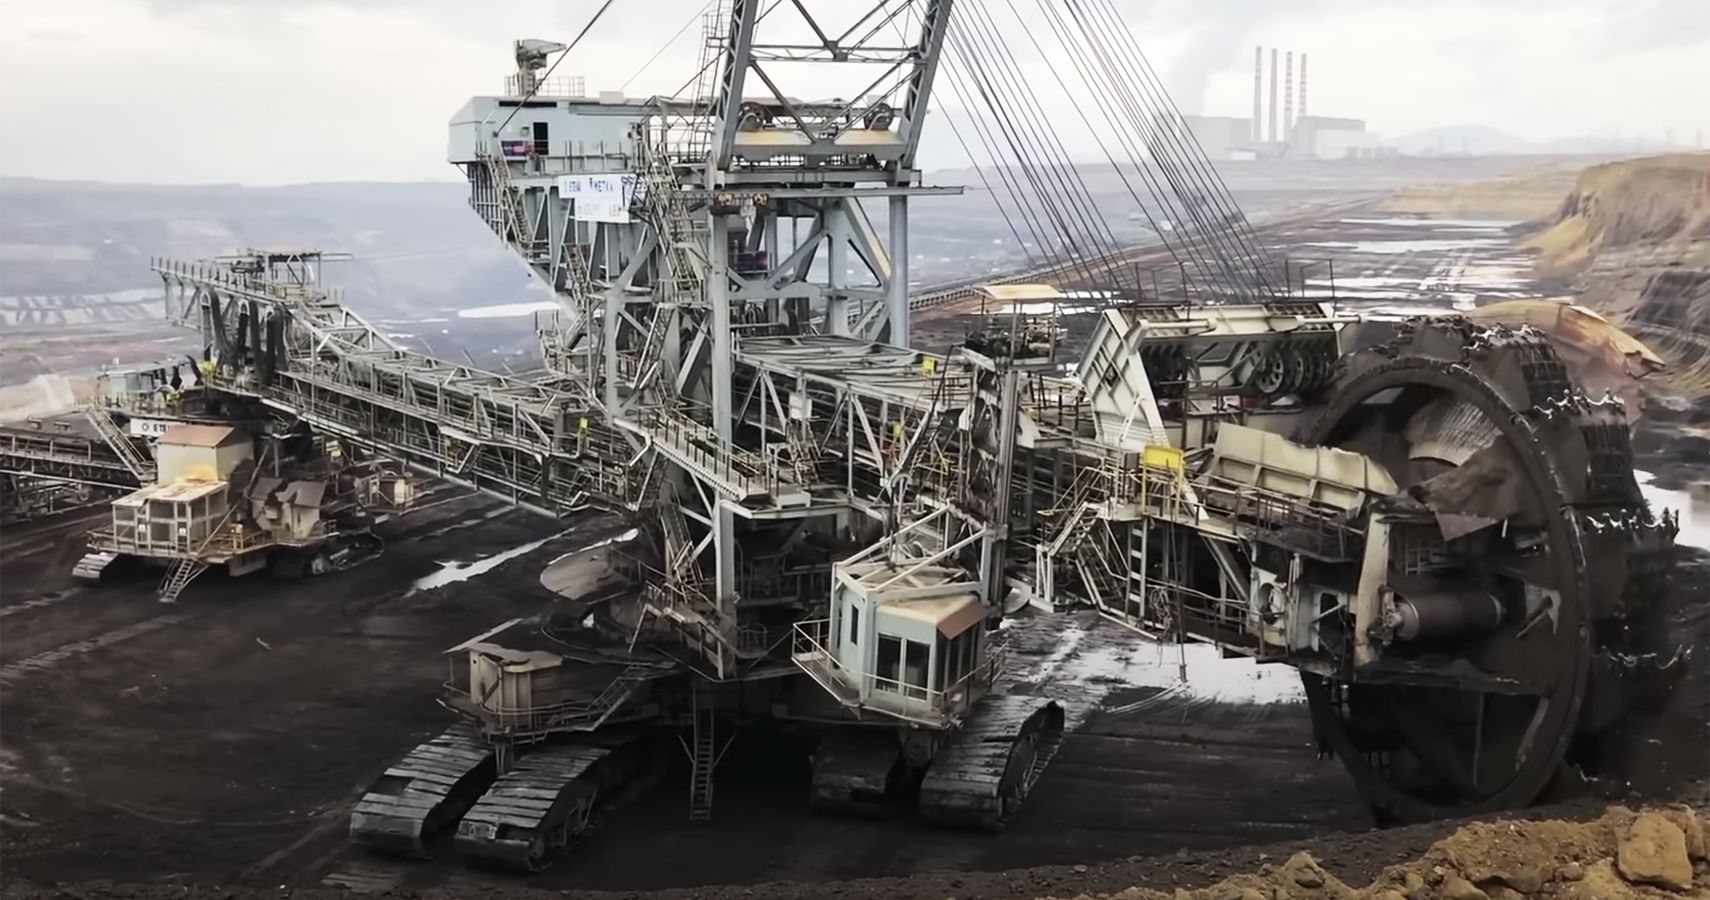 Bagger 293 excavator, aerial view from afar of unit